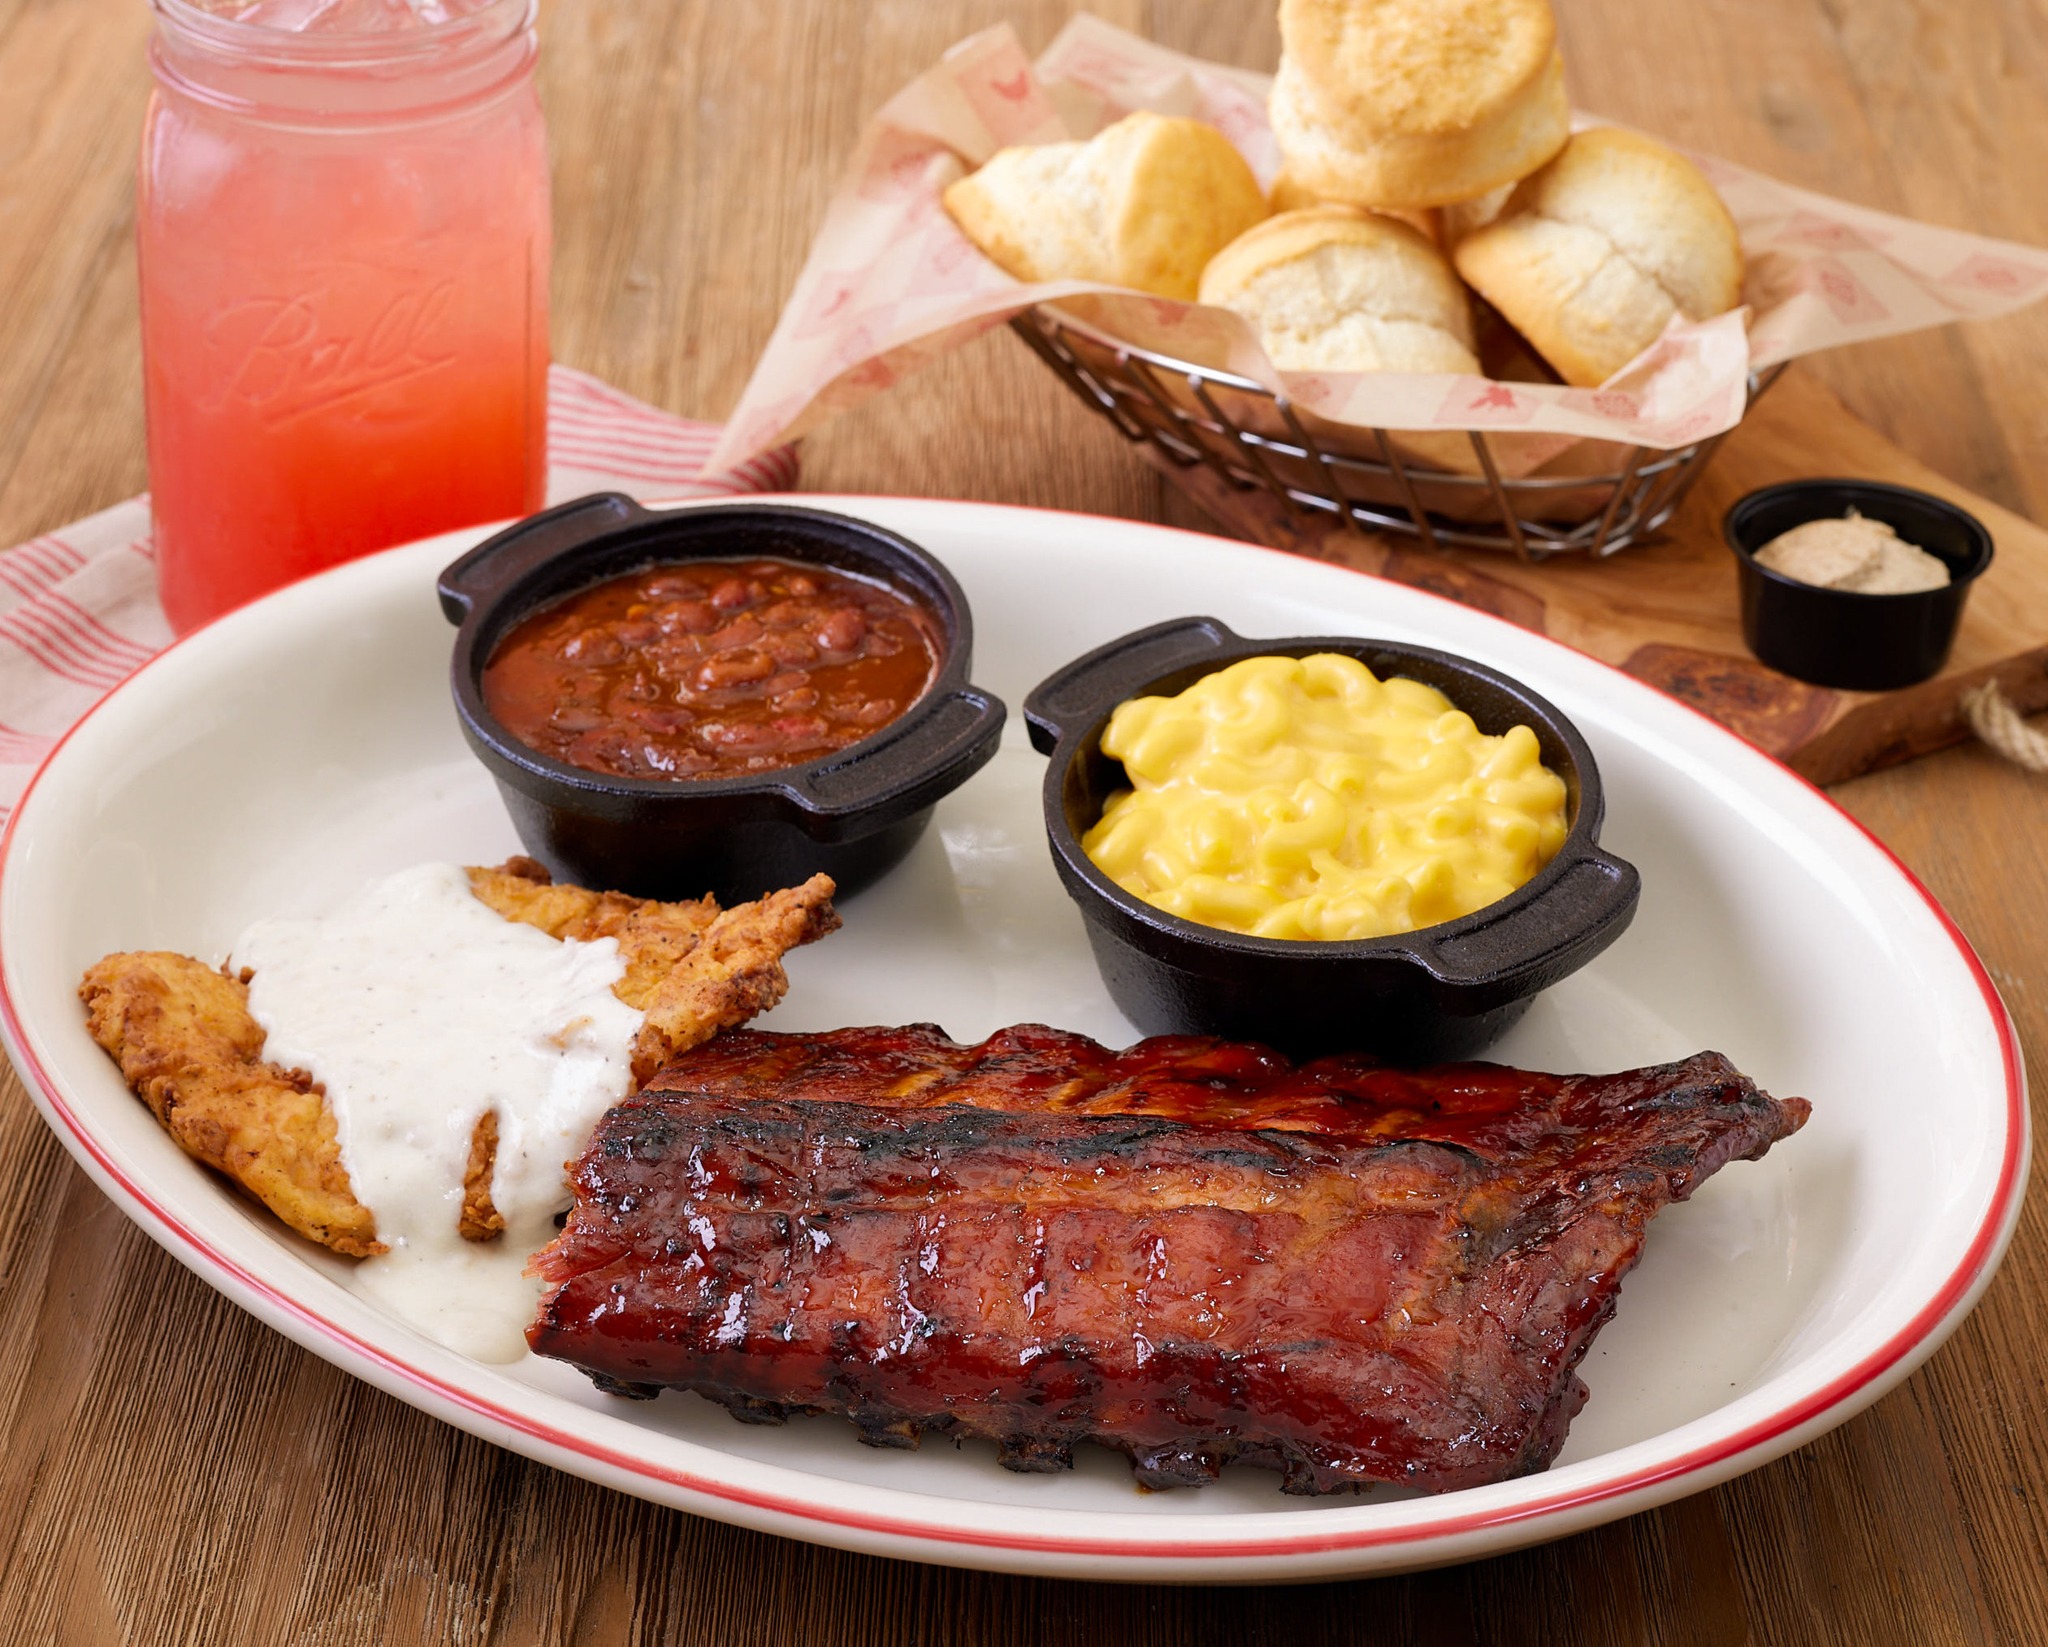 typical barbecue plate at a Lucille's BBQ fundraiser